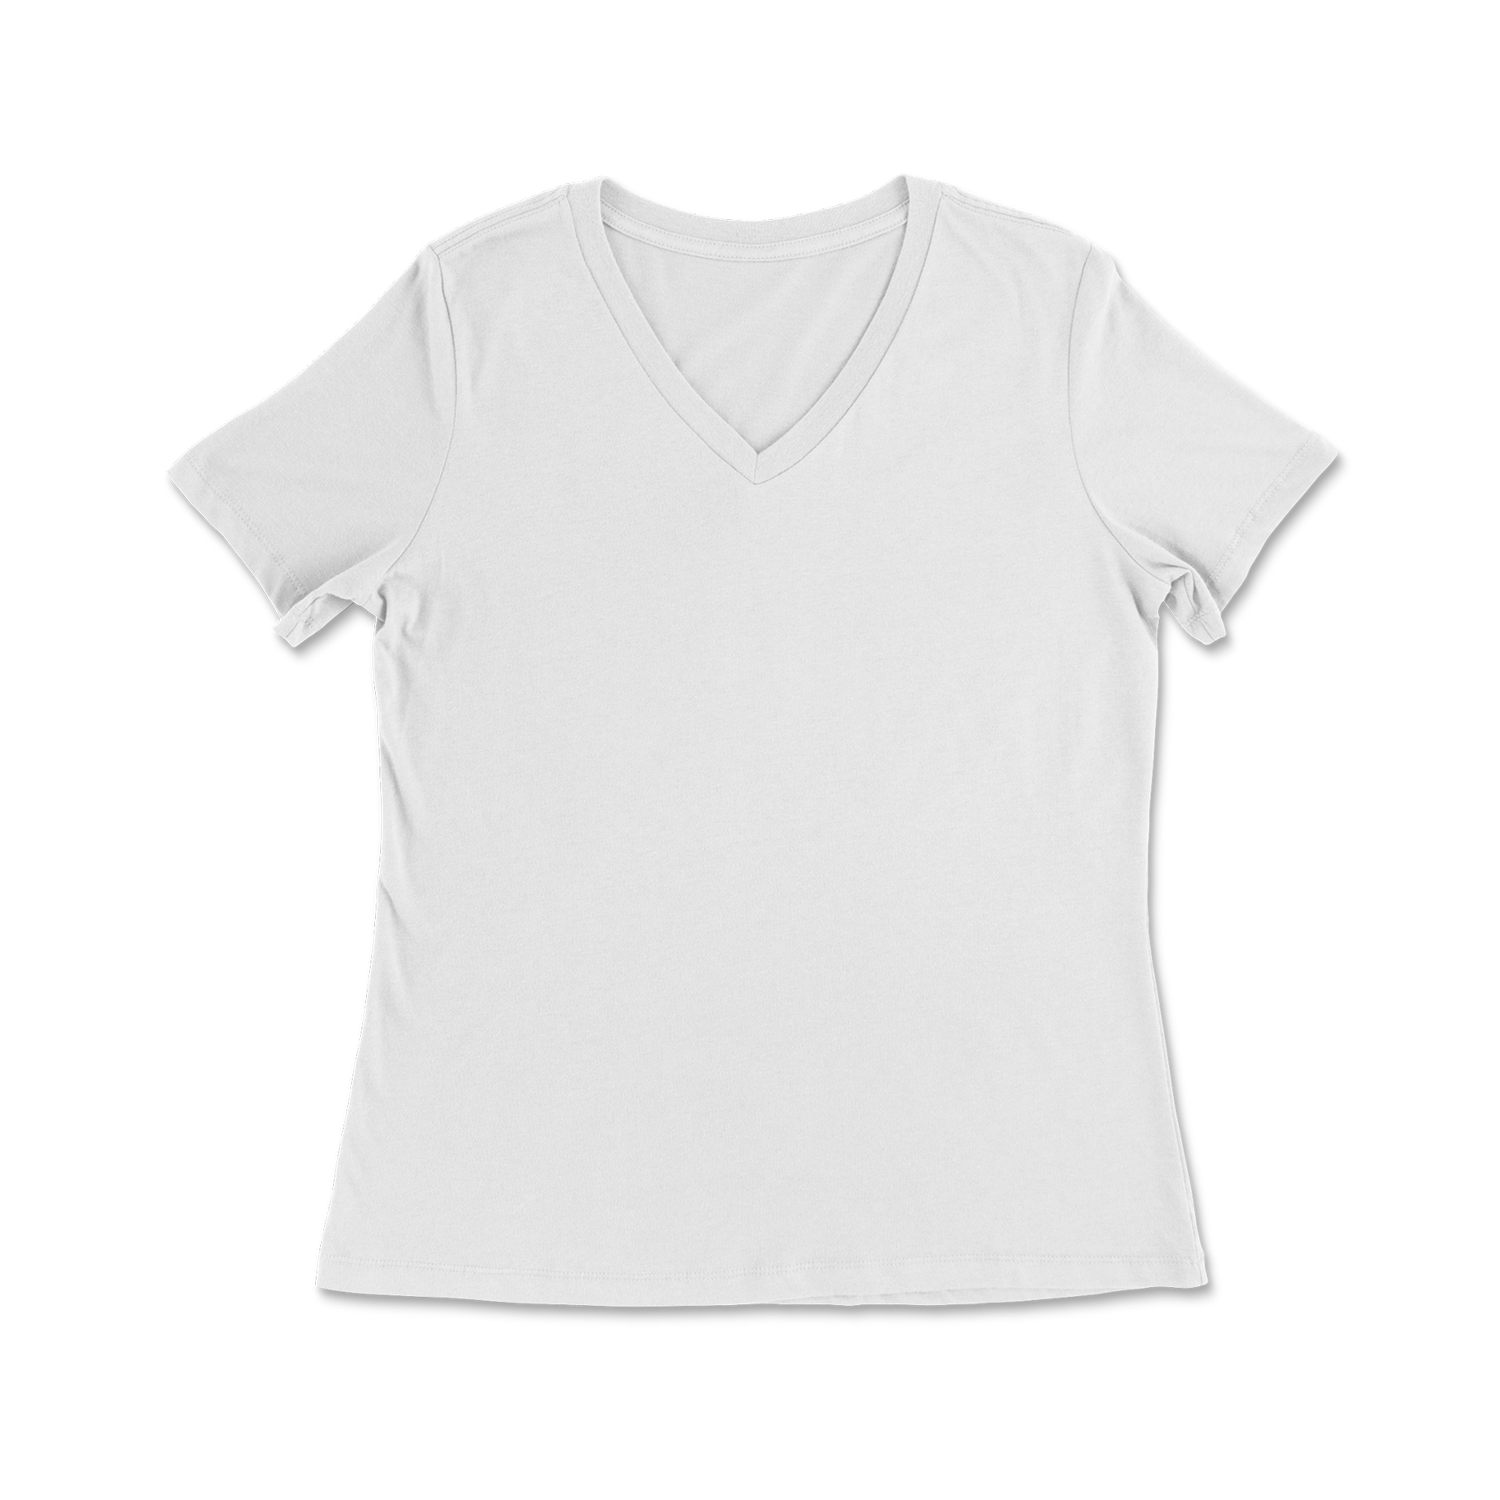 100% Cotton Relaxed Fit V-Neck